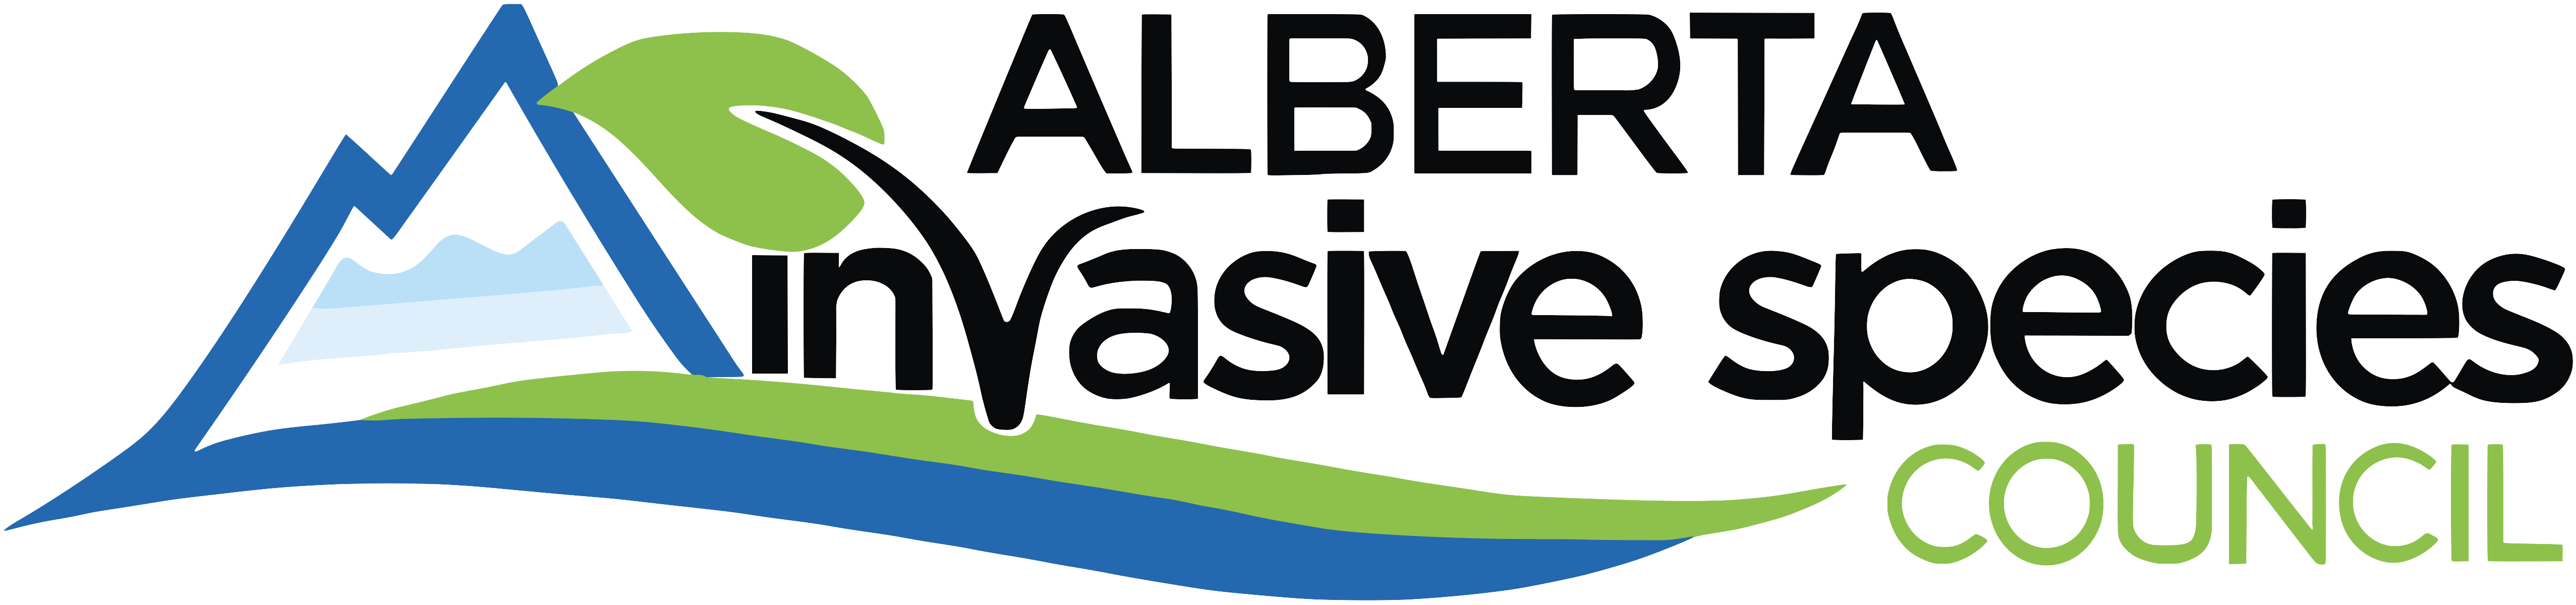 Logo for Alberta Invasive Species Council on a transparent background